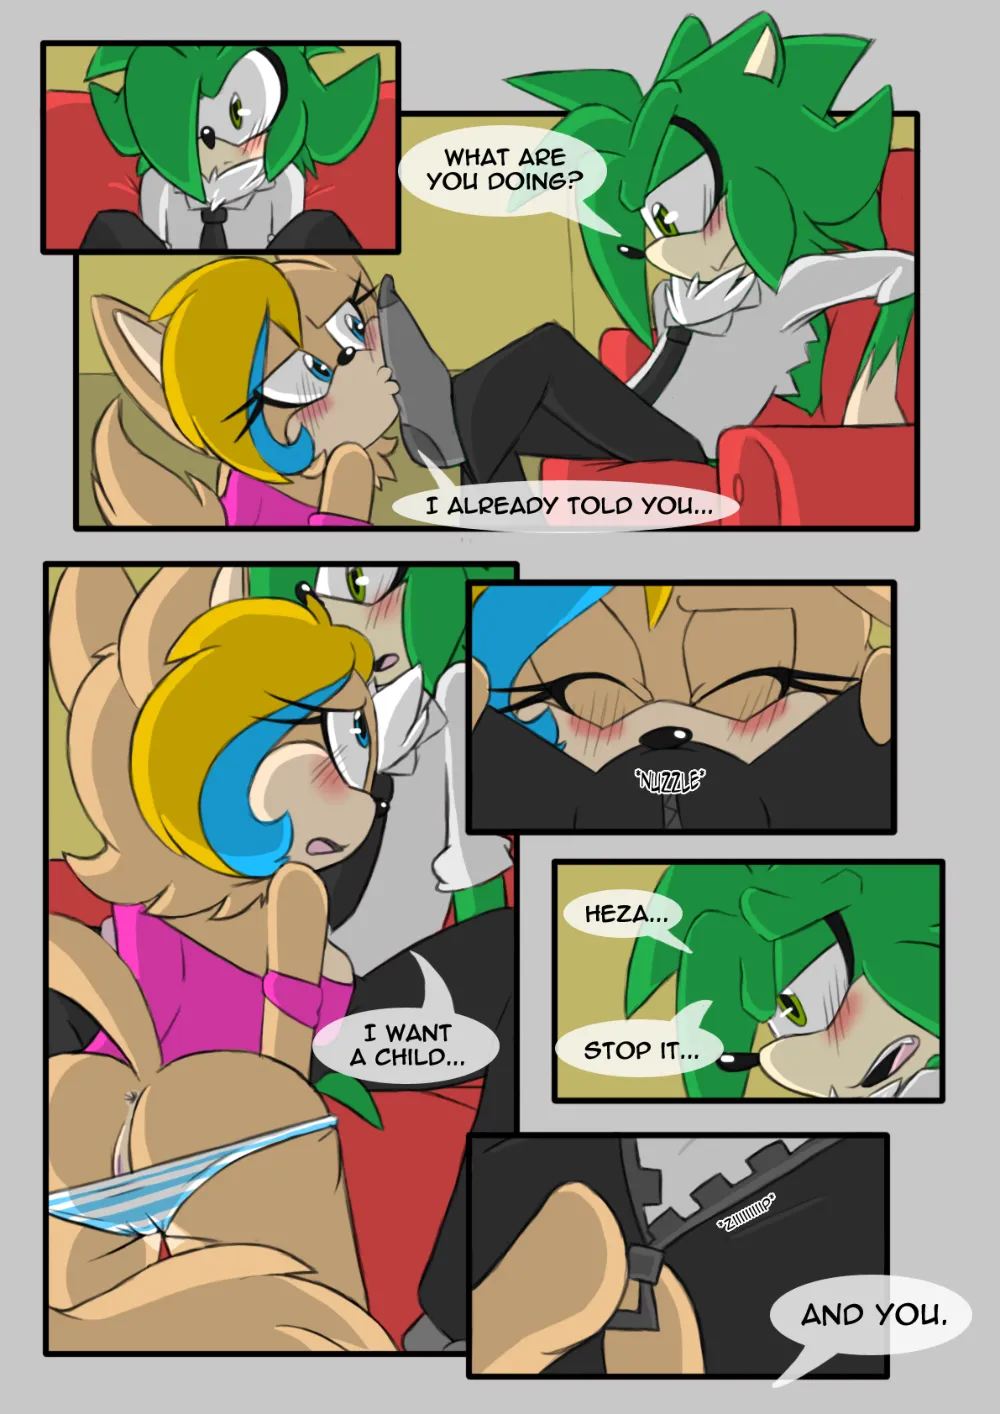 Friends with Benefits - Page 8